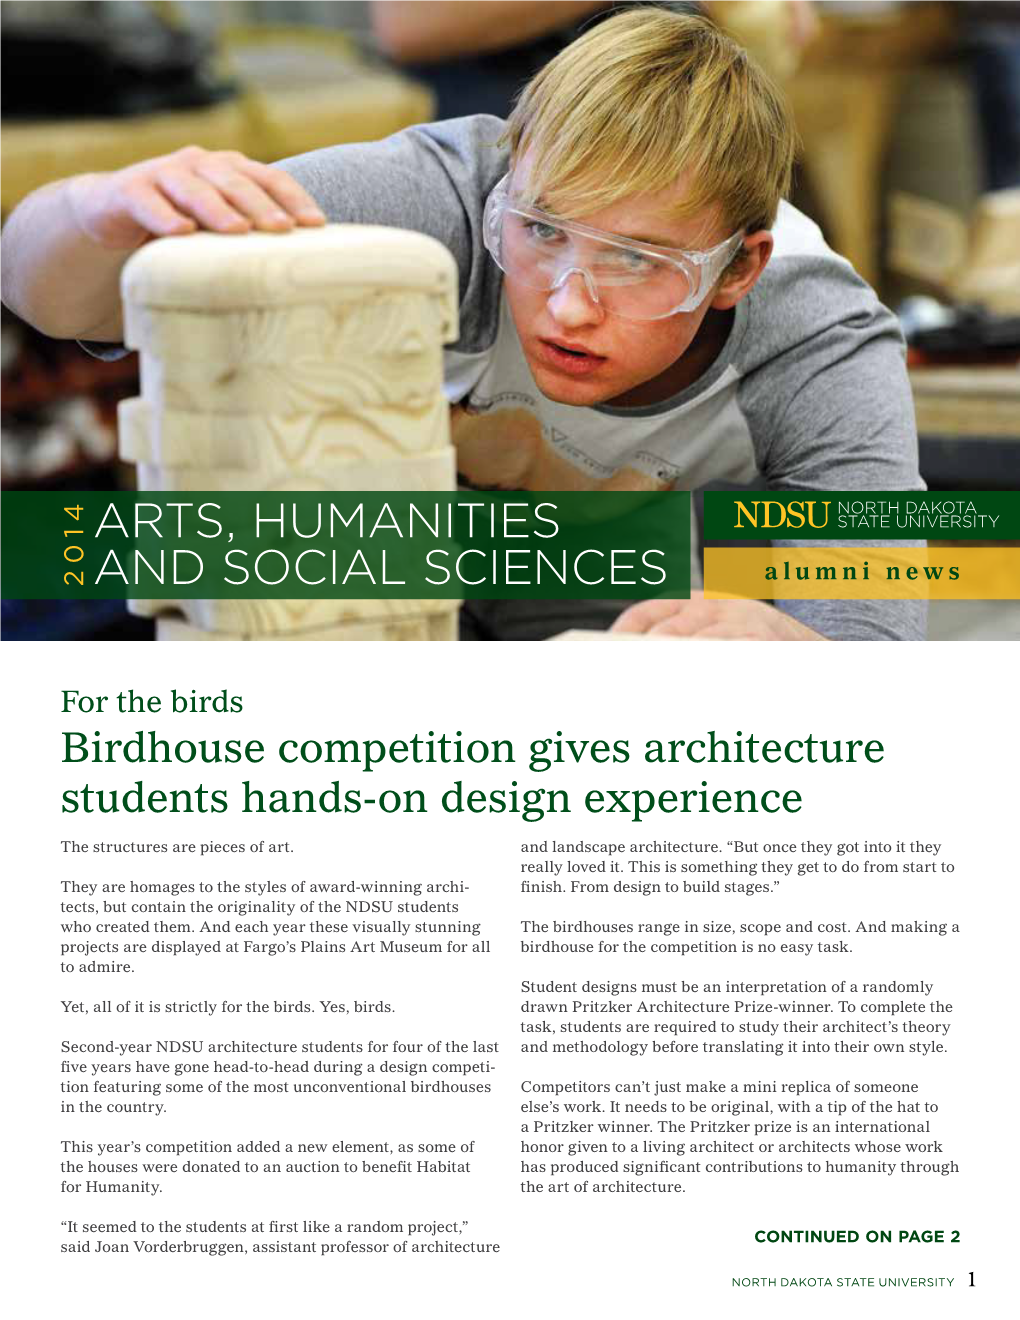 Arts, Humanities and Social Sciences Is Quality of the Students and the Education Here